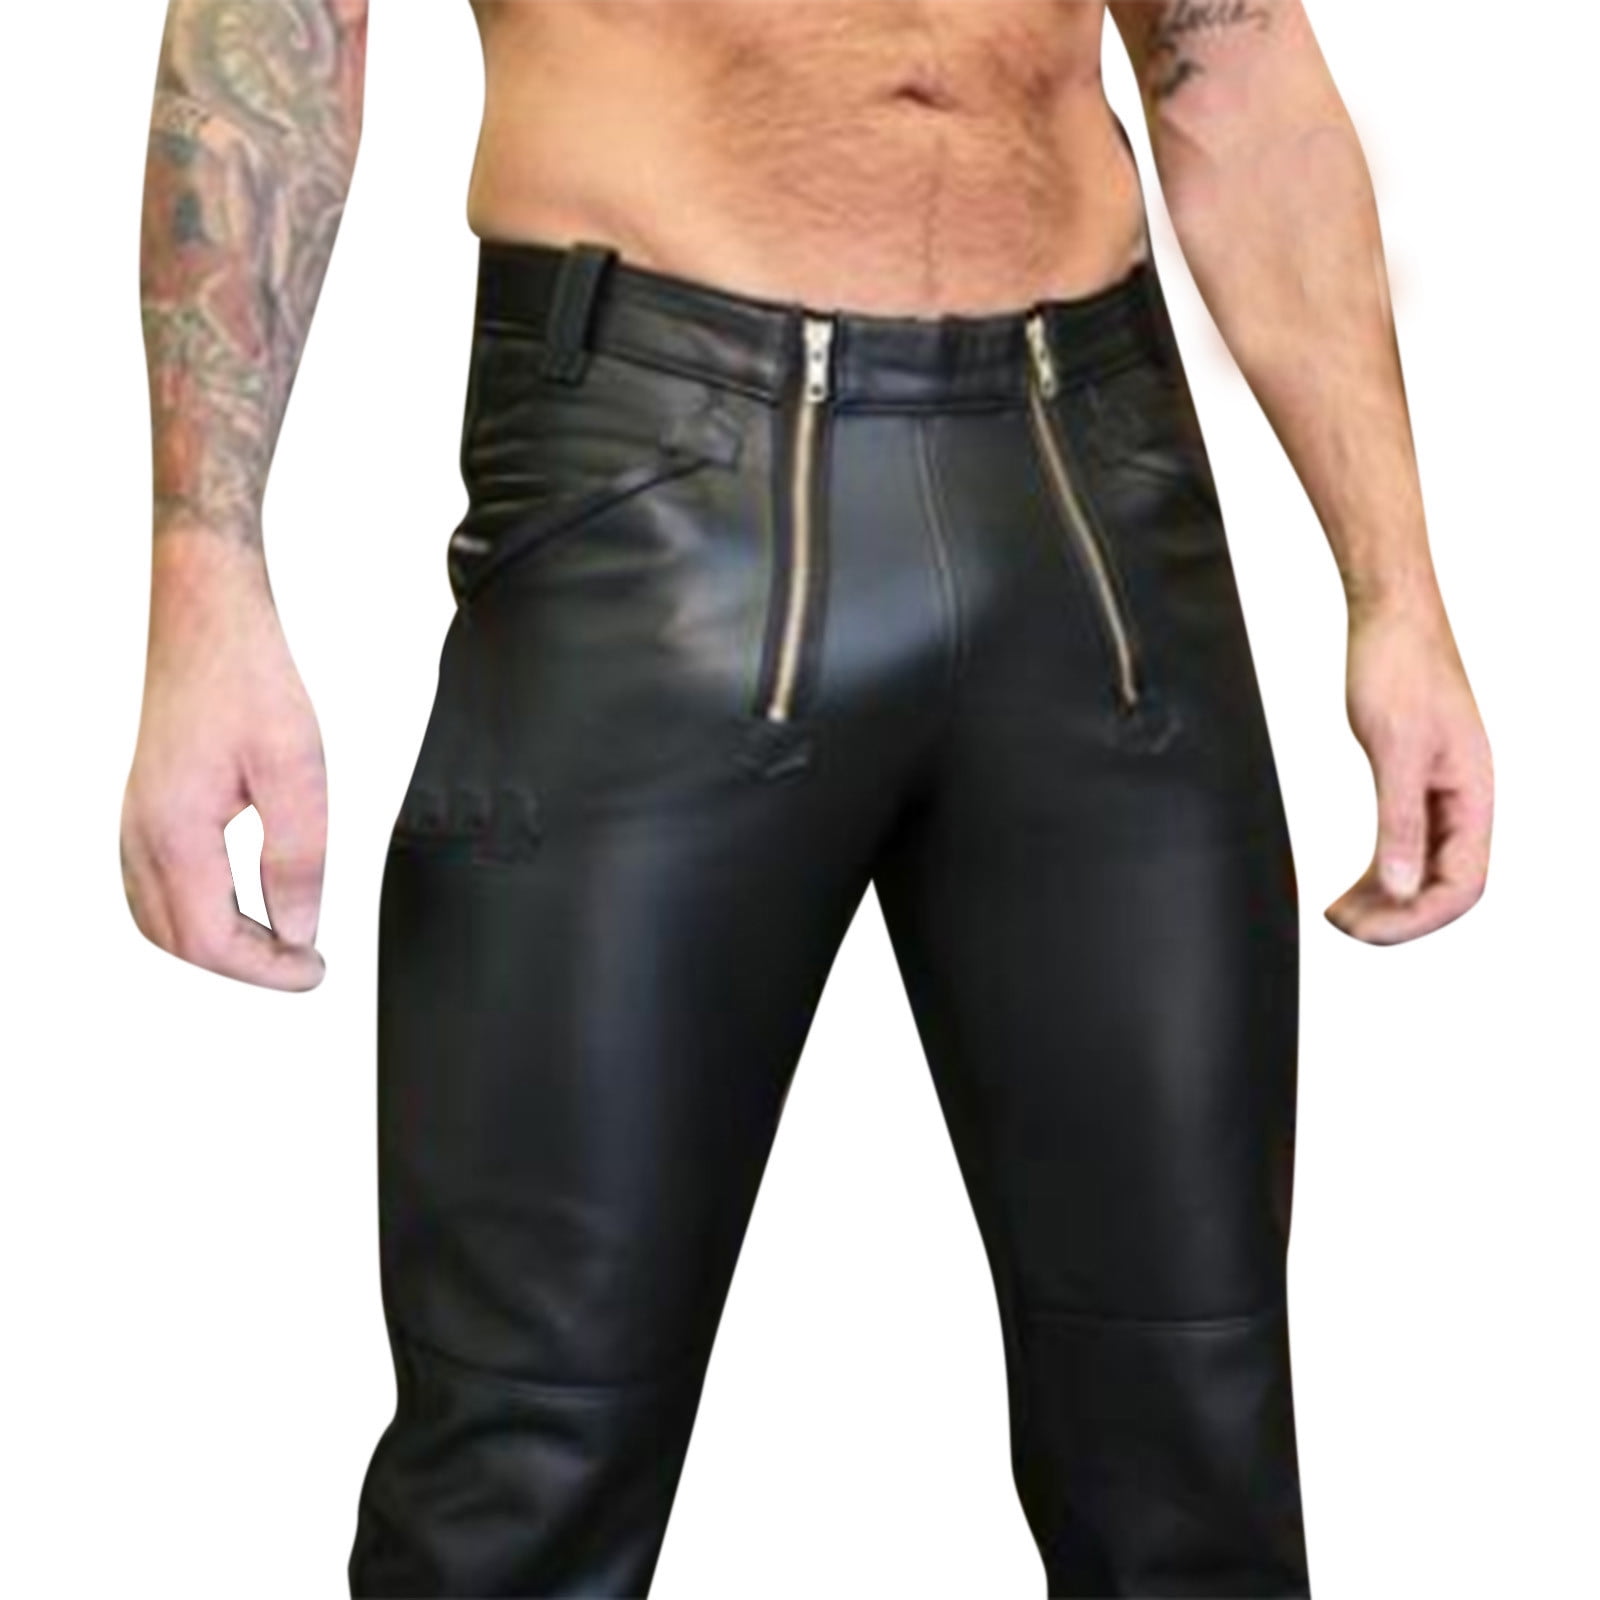 Sleek Sophistication: Men's Fashion Slim Fit Genuine Black Leather Pant |  Free Shipping Included